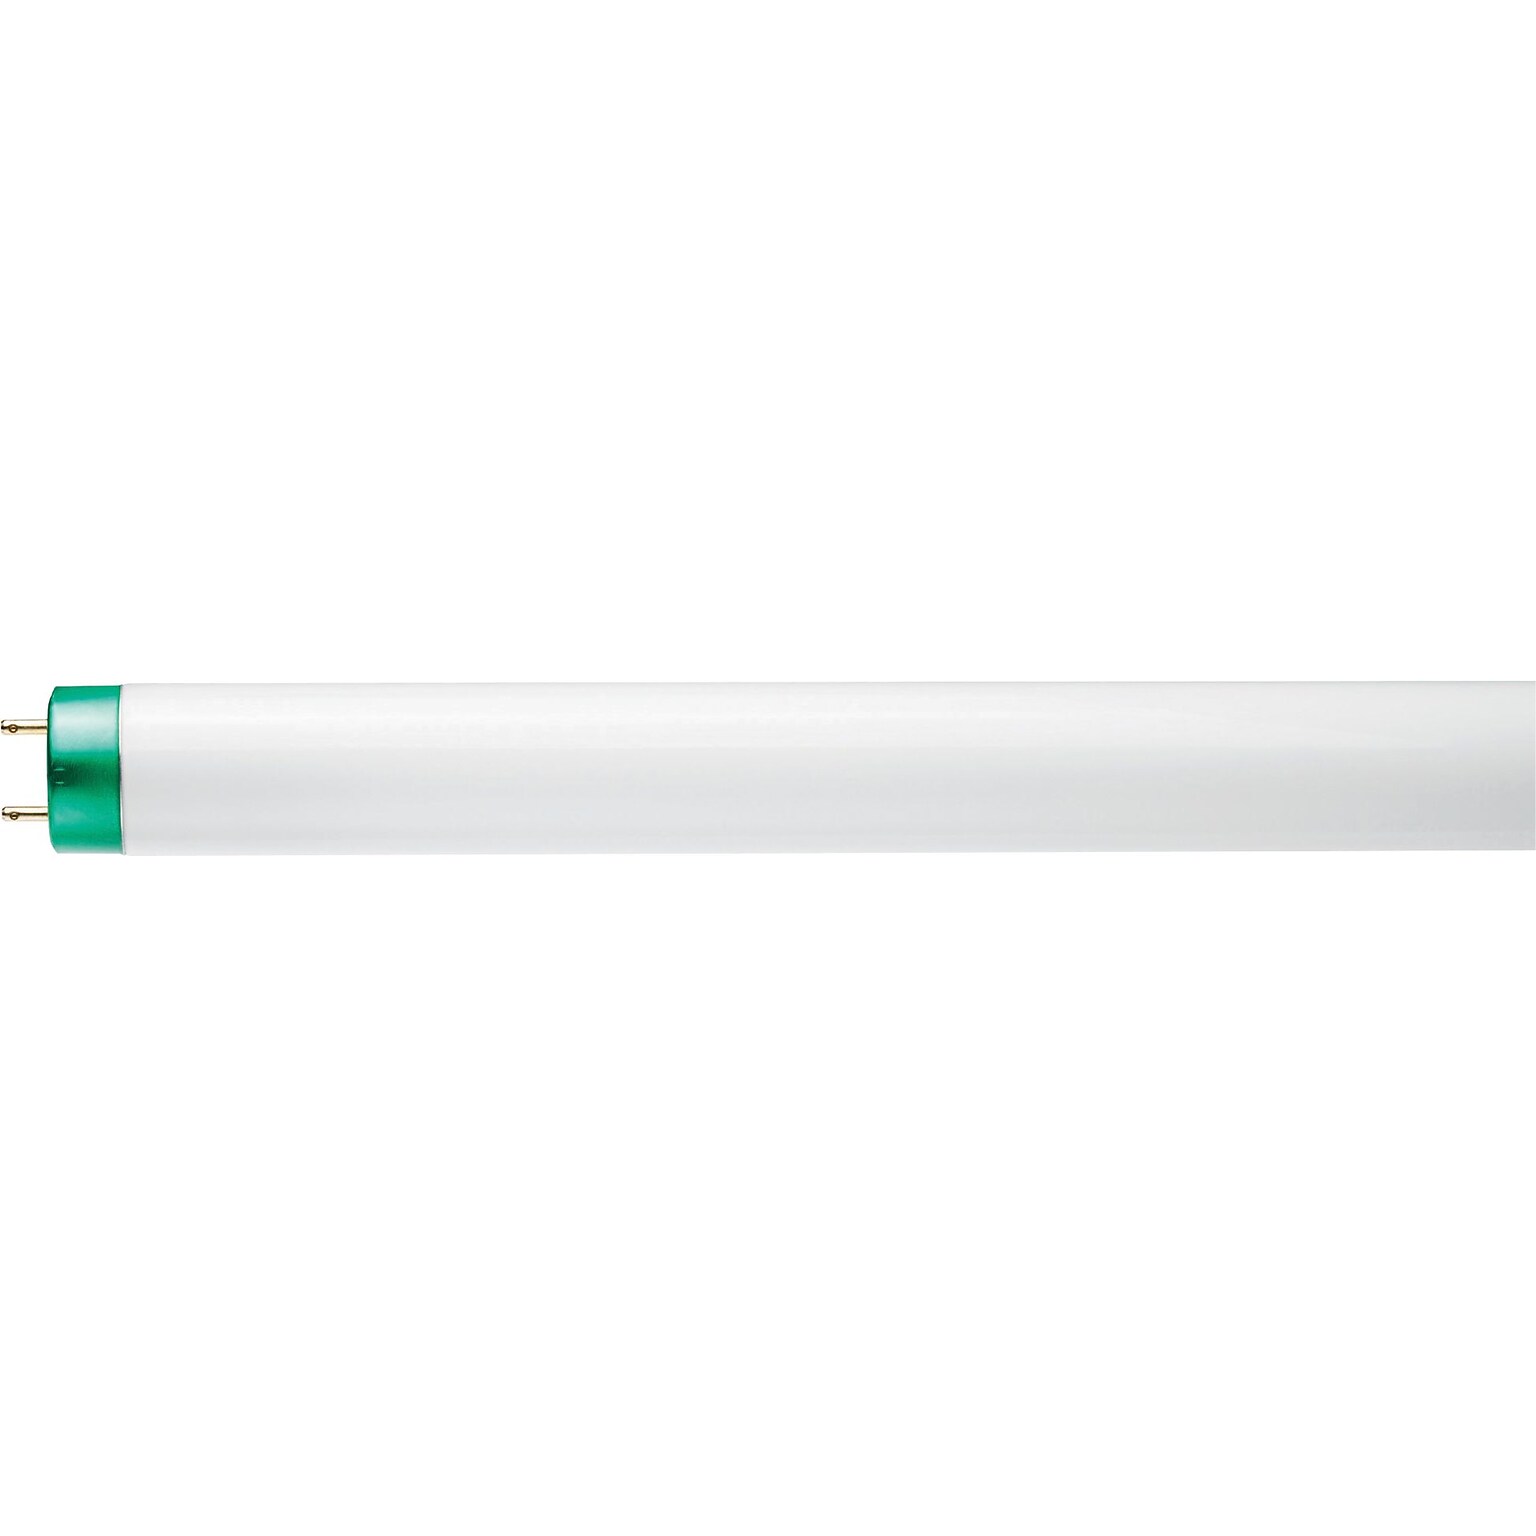 Philips Linear Fluorescent T8 Lamp, Long Life, 28 Watts, Cool White, 30PK